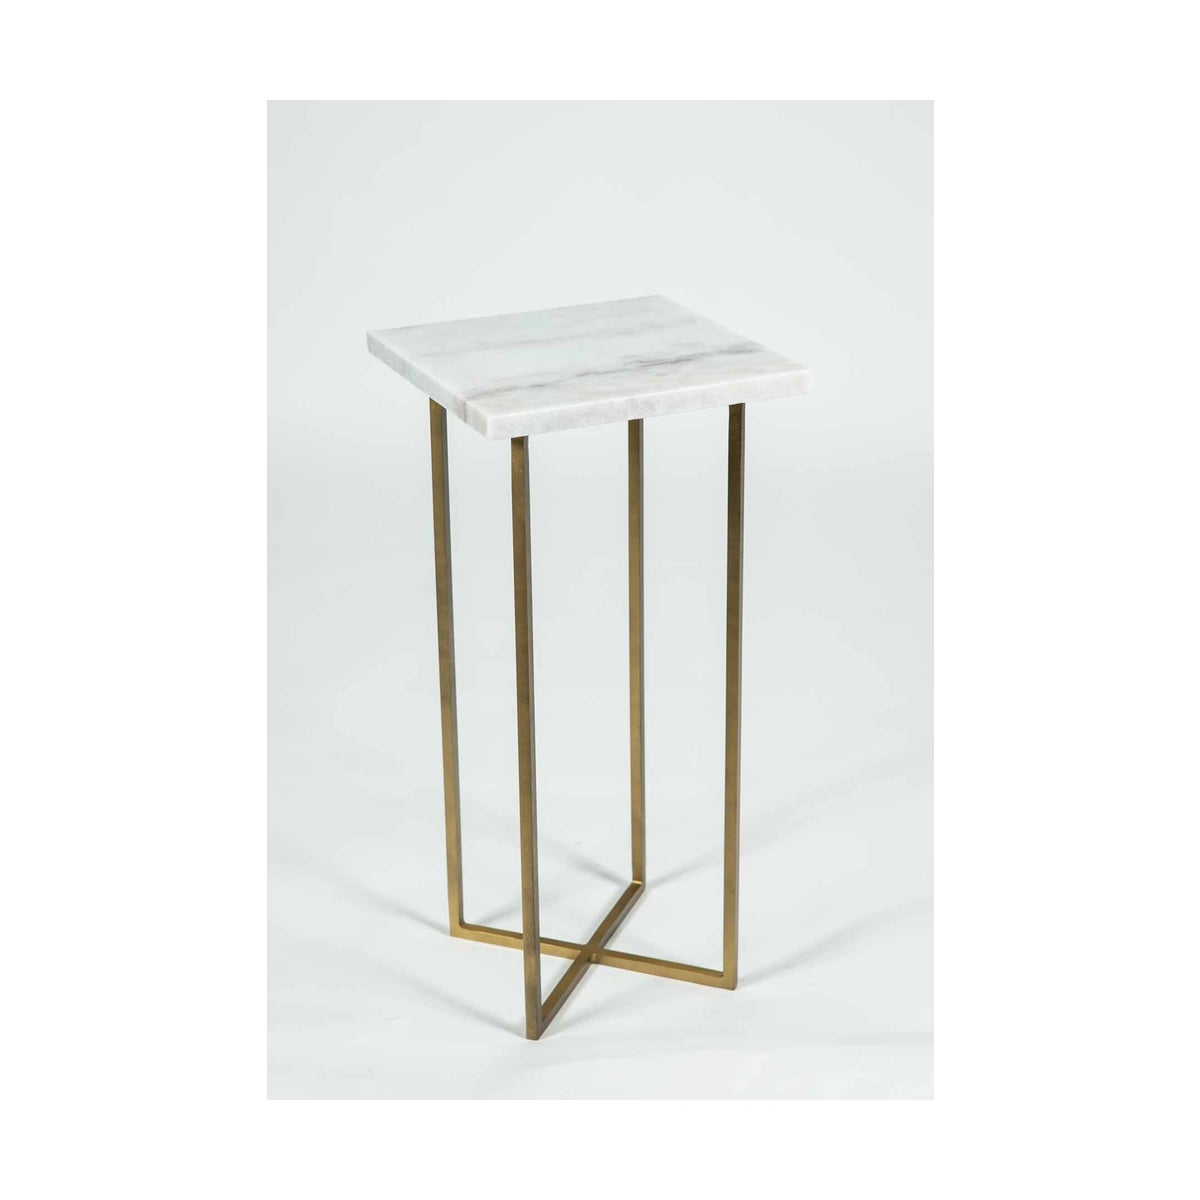 Grayson Accent Table in Antique Brass w/ White Marble Top